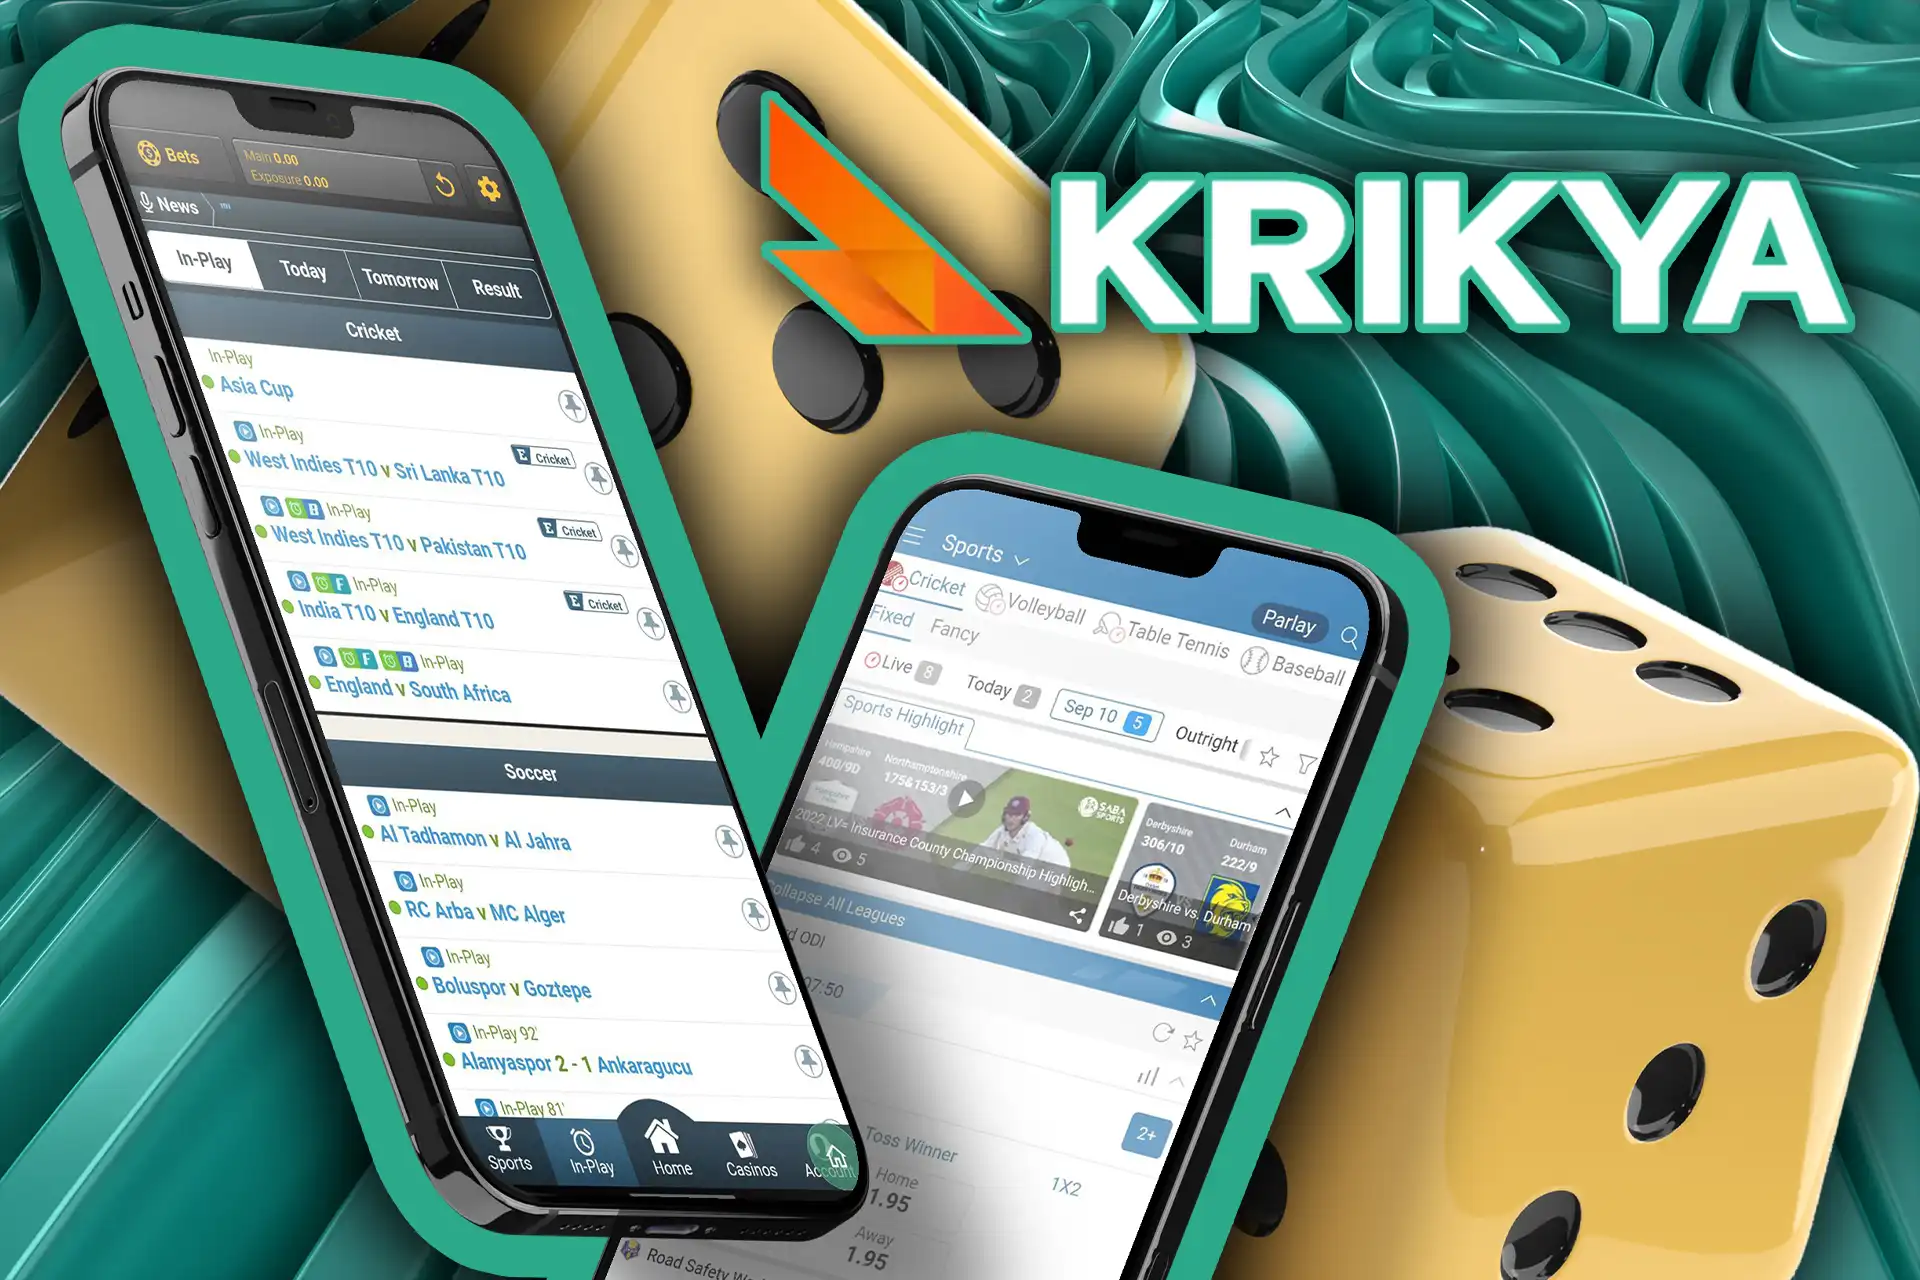 The Krikya app allows placing bets before and during the match.